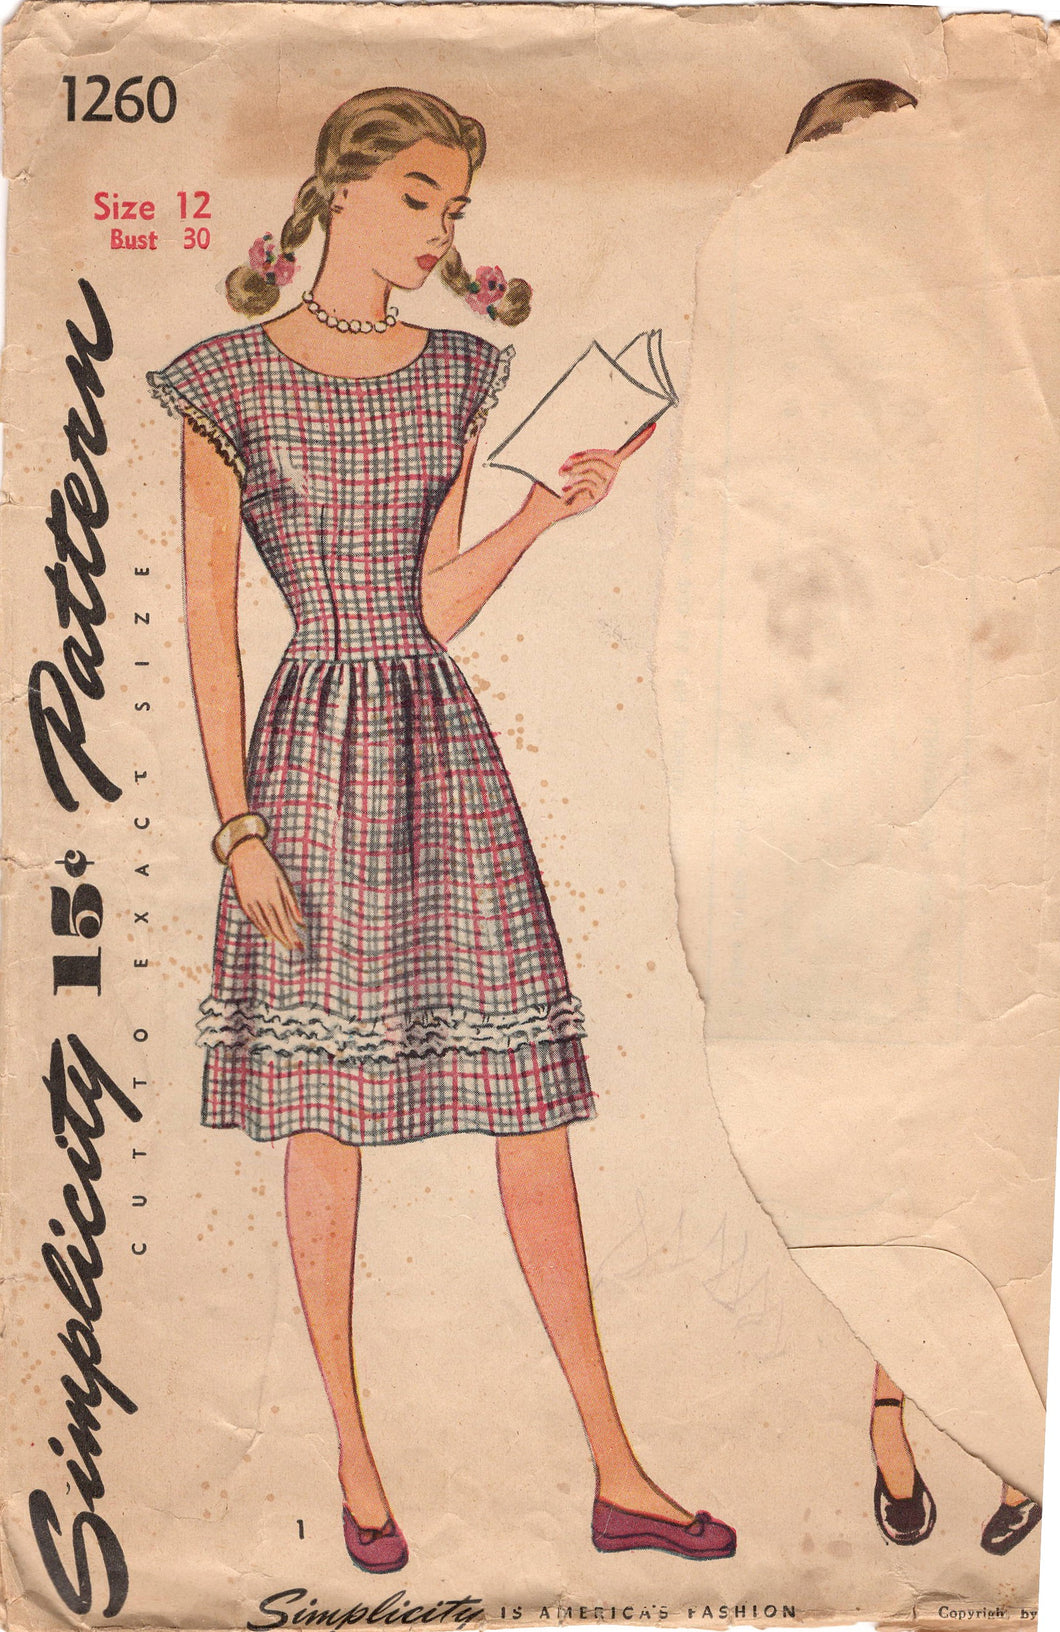 1940's SImplicity One-Piece Dress with Square or Round Neckline Pattern - Bust 30